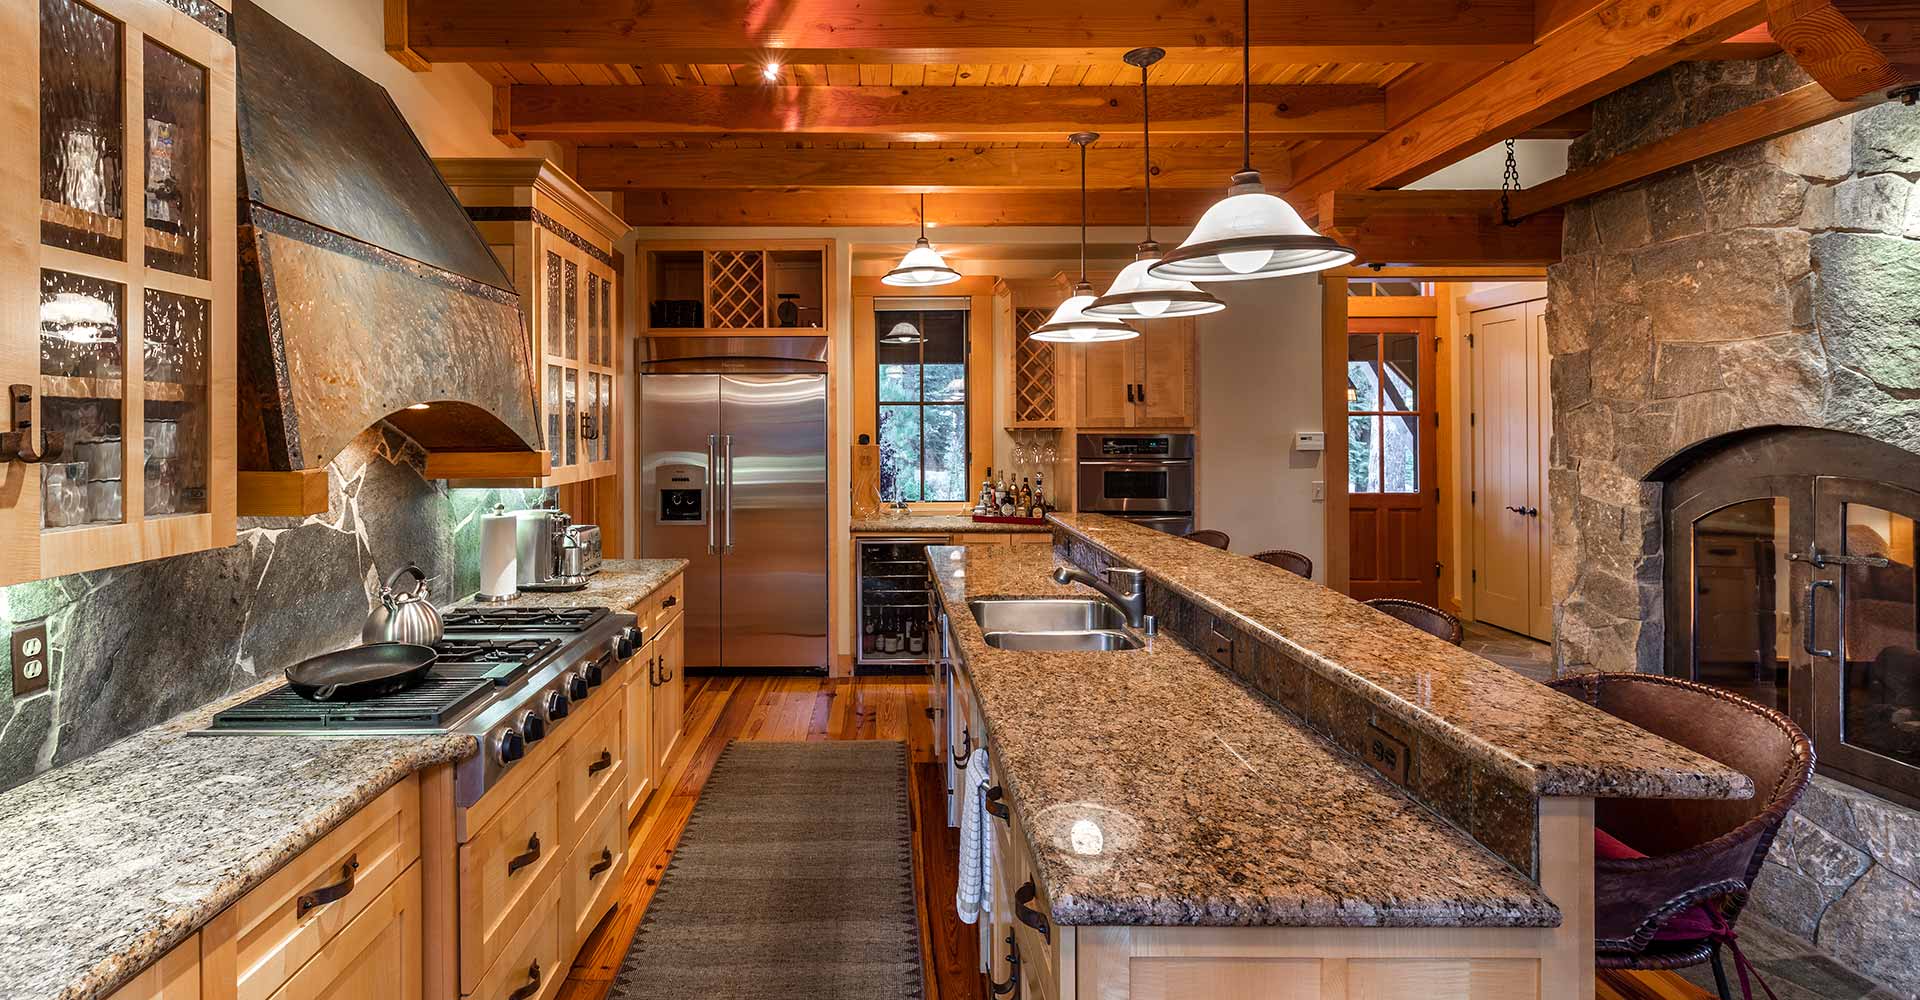 Truckee Lahontan Luxury home for sale - 8455 Lahontan Drive